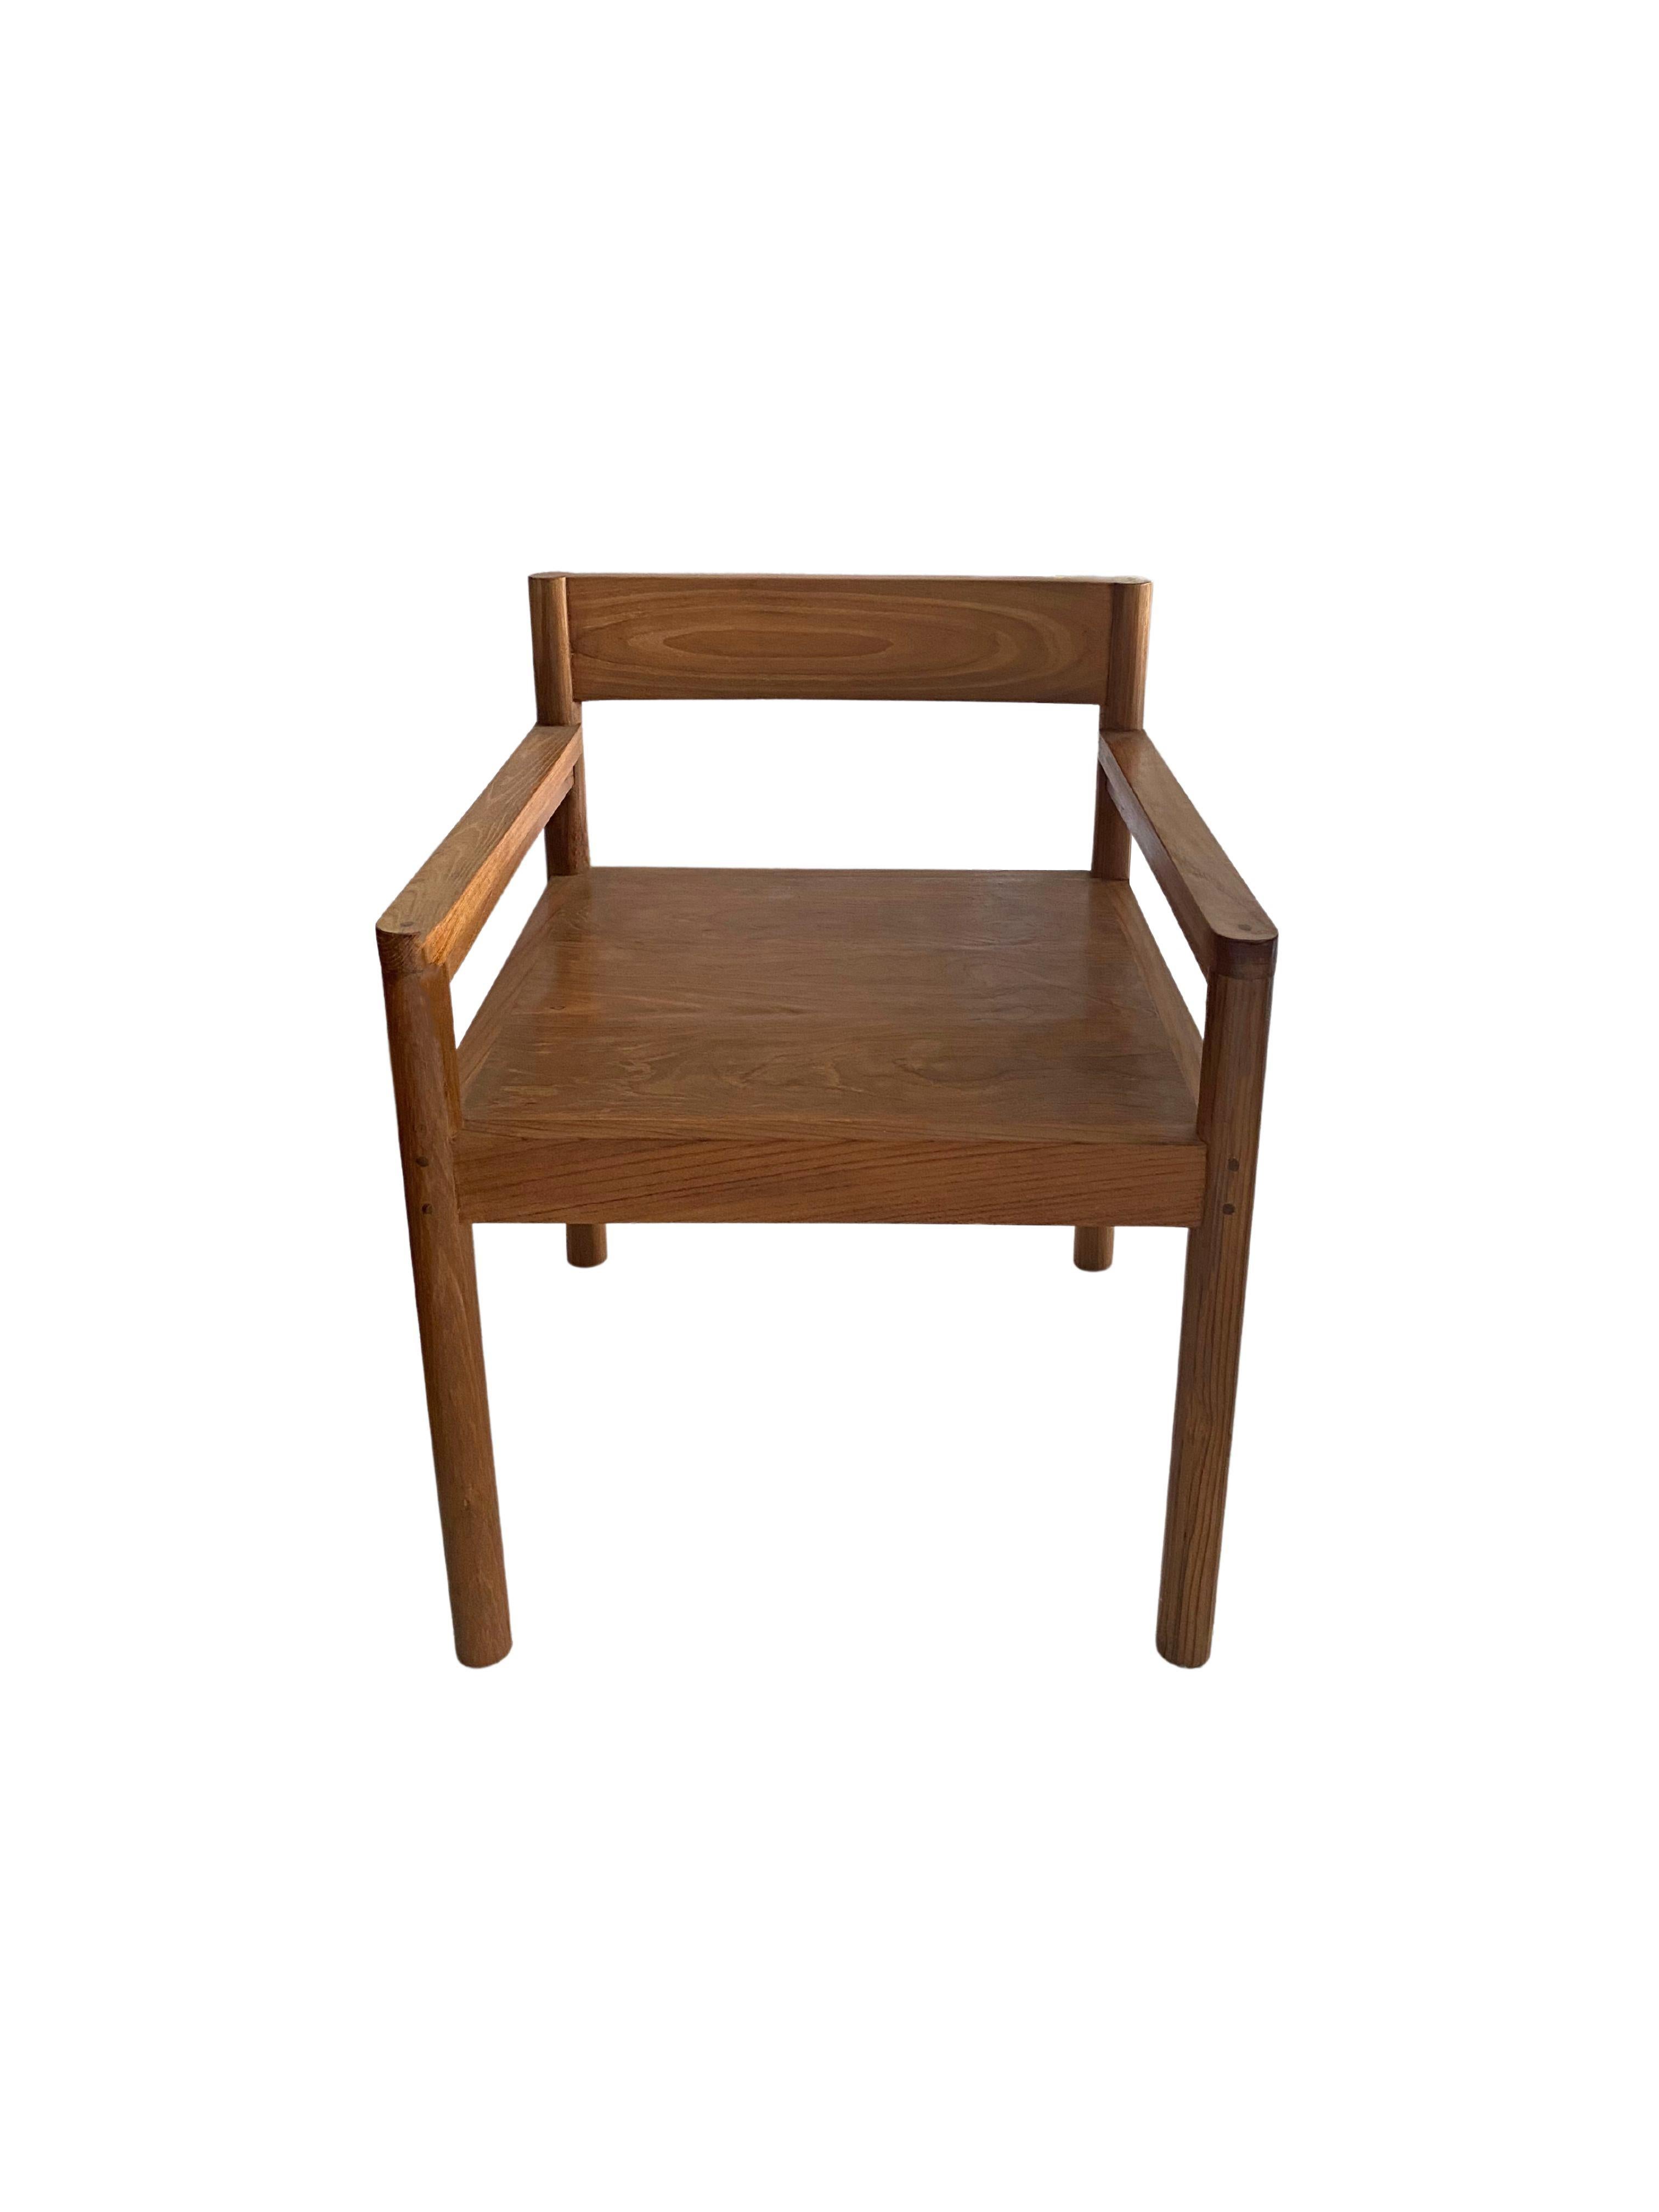 A skilfully crafted teak wood chair. This chair was crafted by local artisans using a wood joinery technique without the use of nails. The chair is wonderfully proportioned with slender arm rests and legs. The teak wood patterning present on all